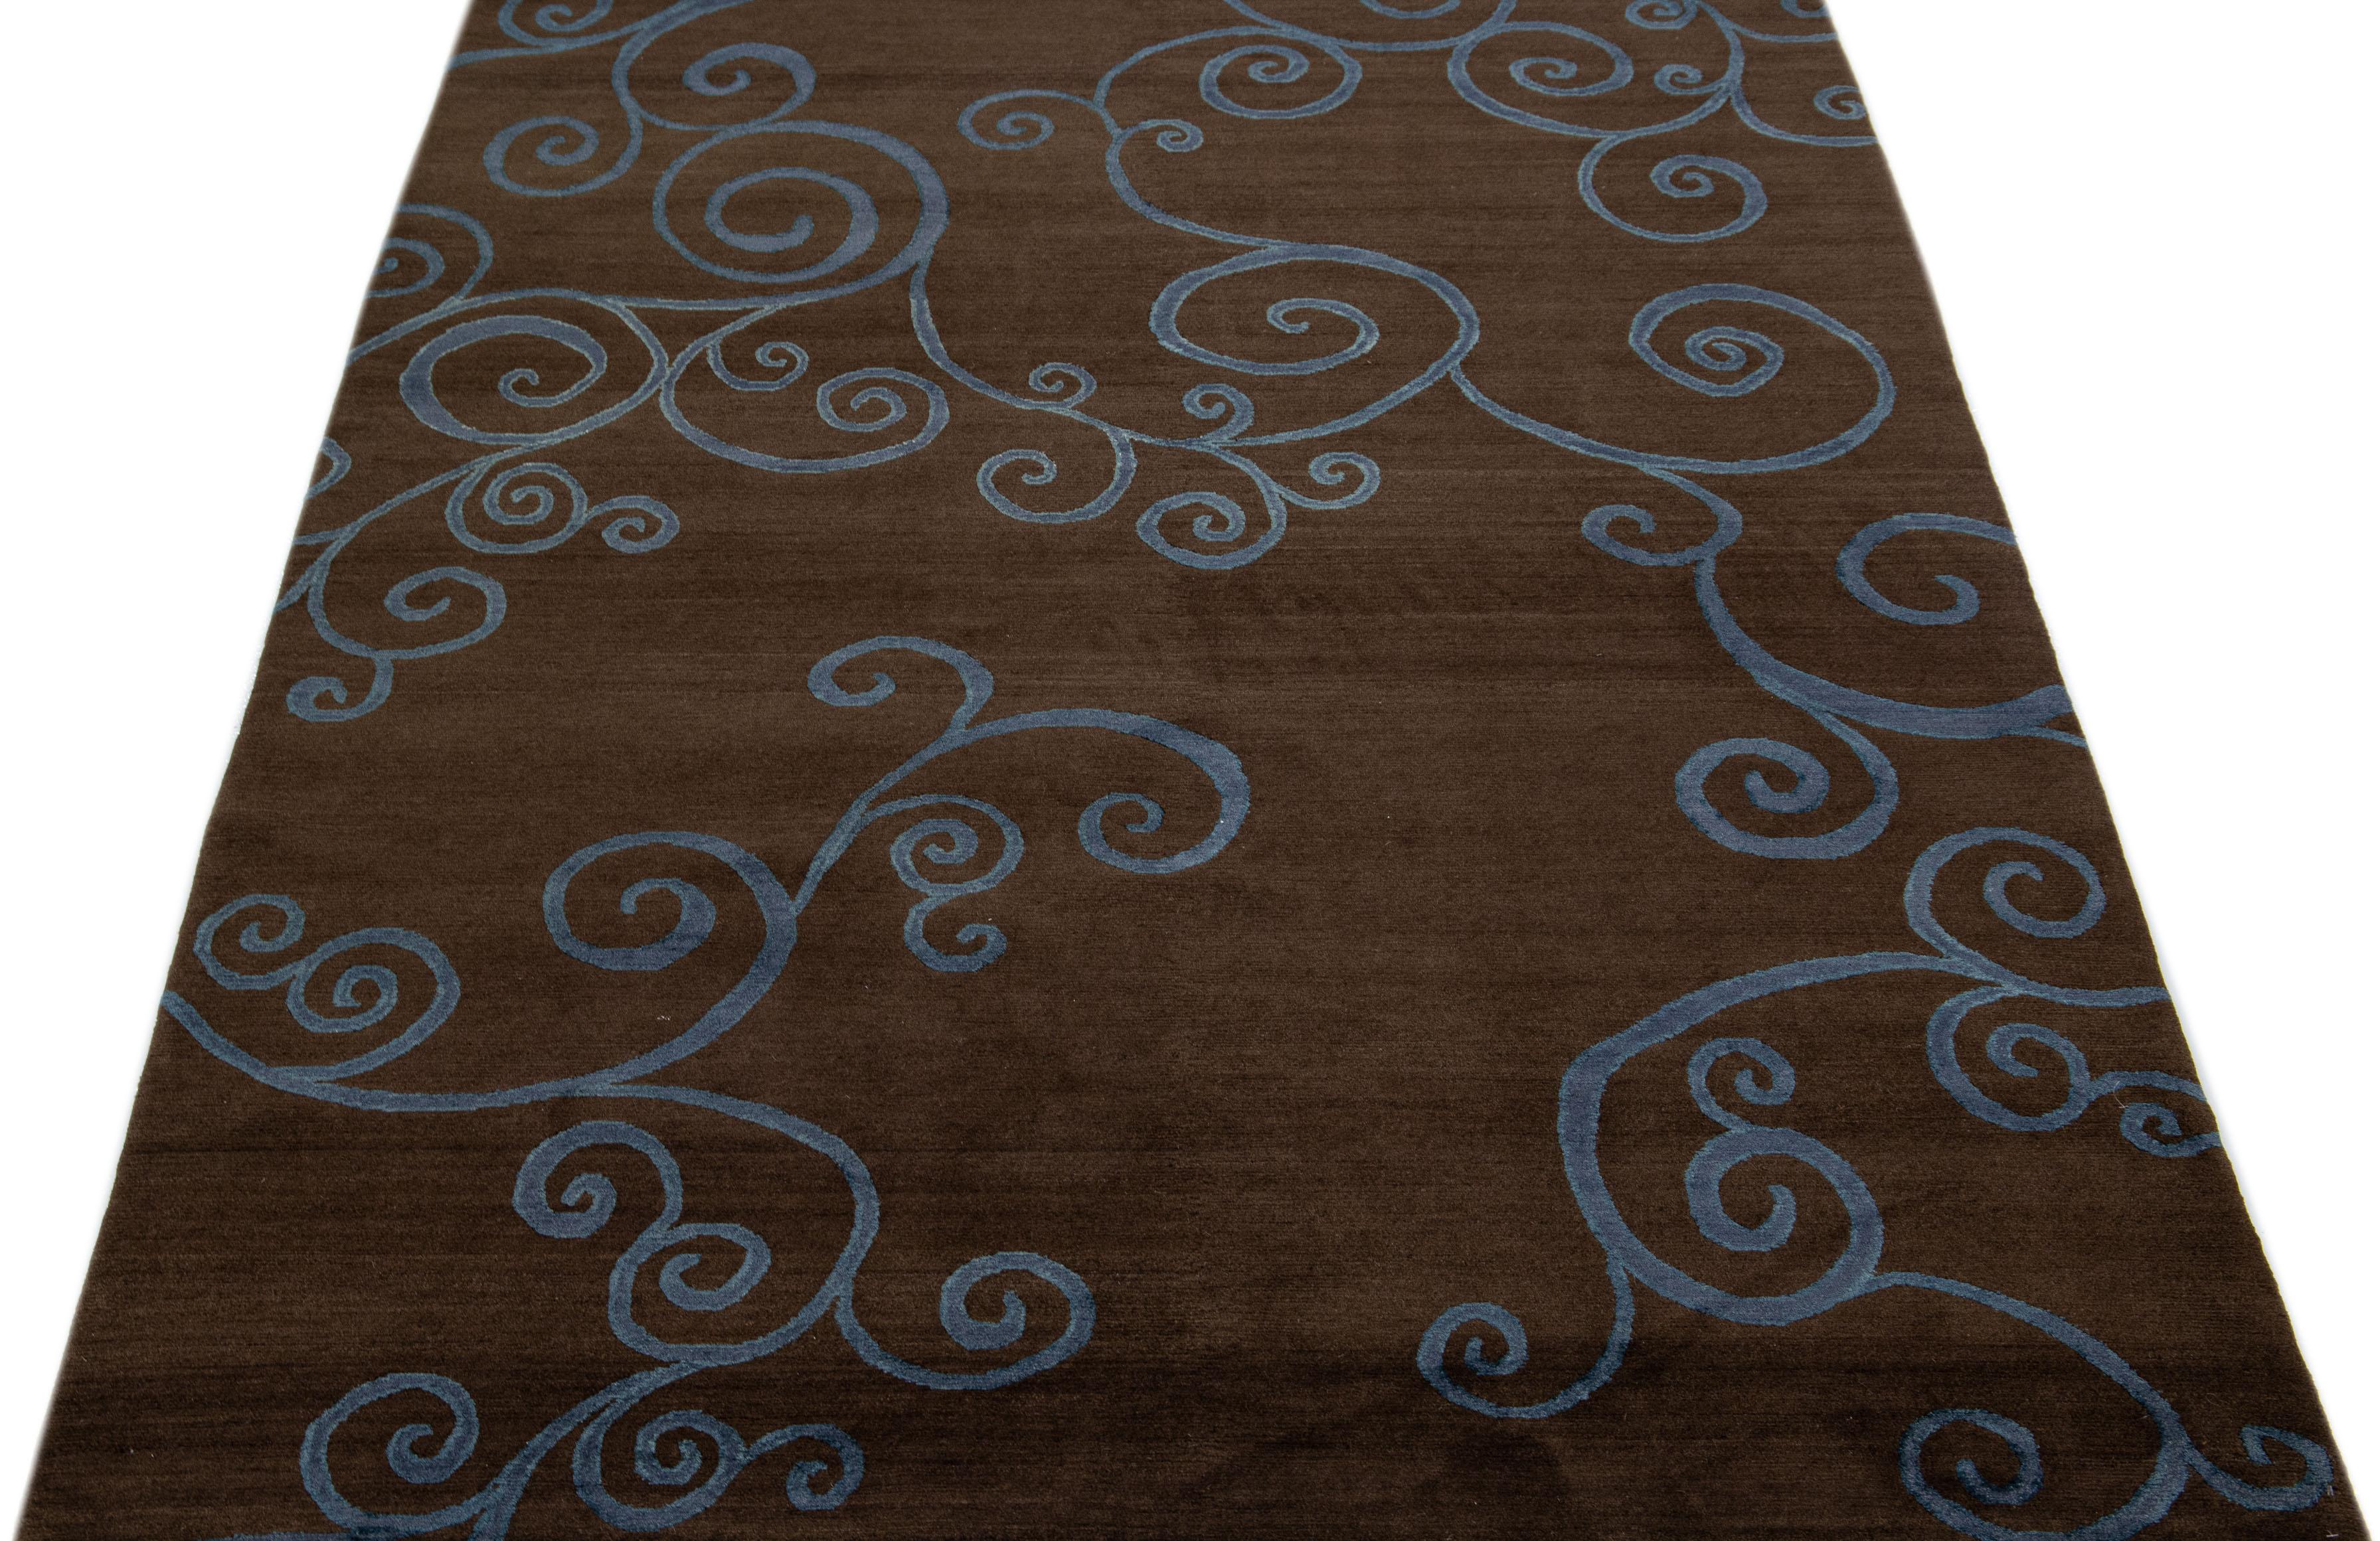 This contemporary Tibetan rug is expertly crafted by hand using wool and silk and boasts a striking brown color field. Adding to its charm is an all-over abstract geometric pattern in blue.

This rug measures 6' x 9'.